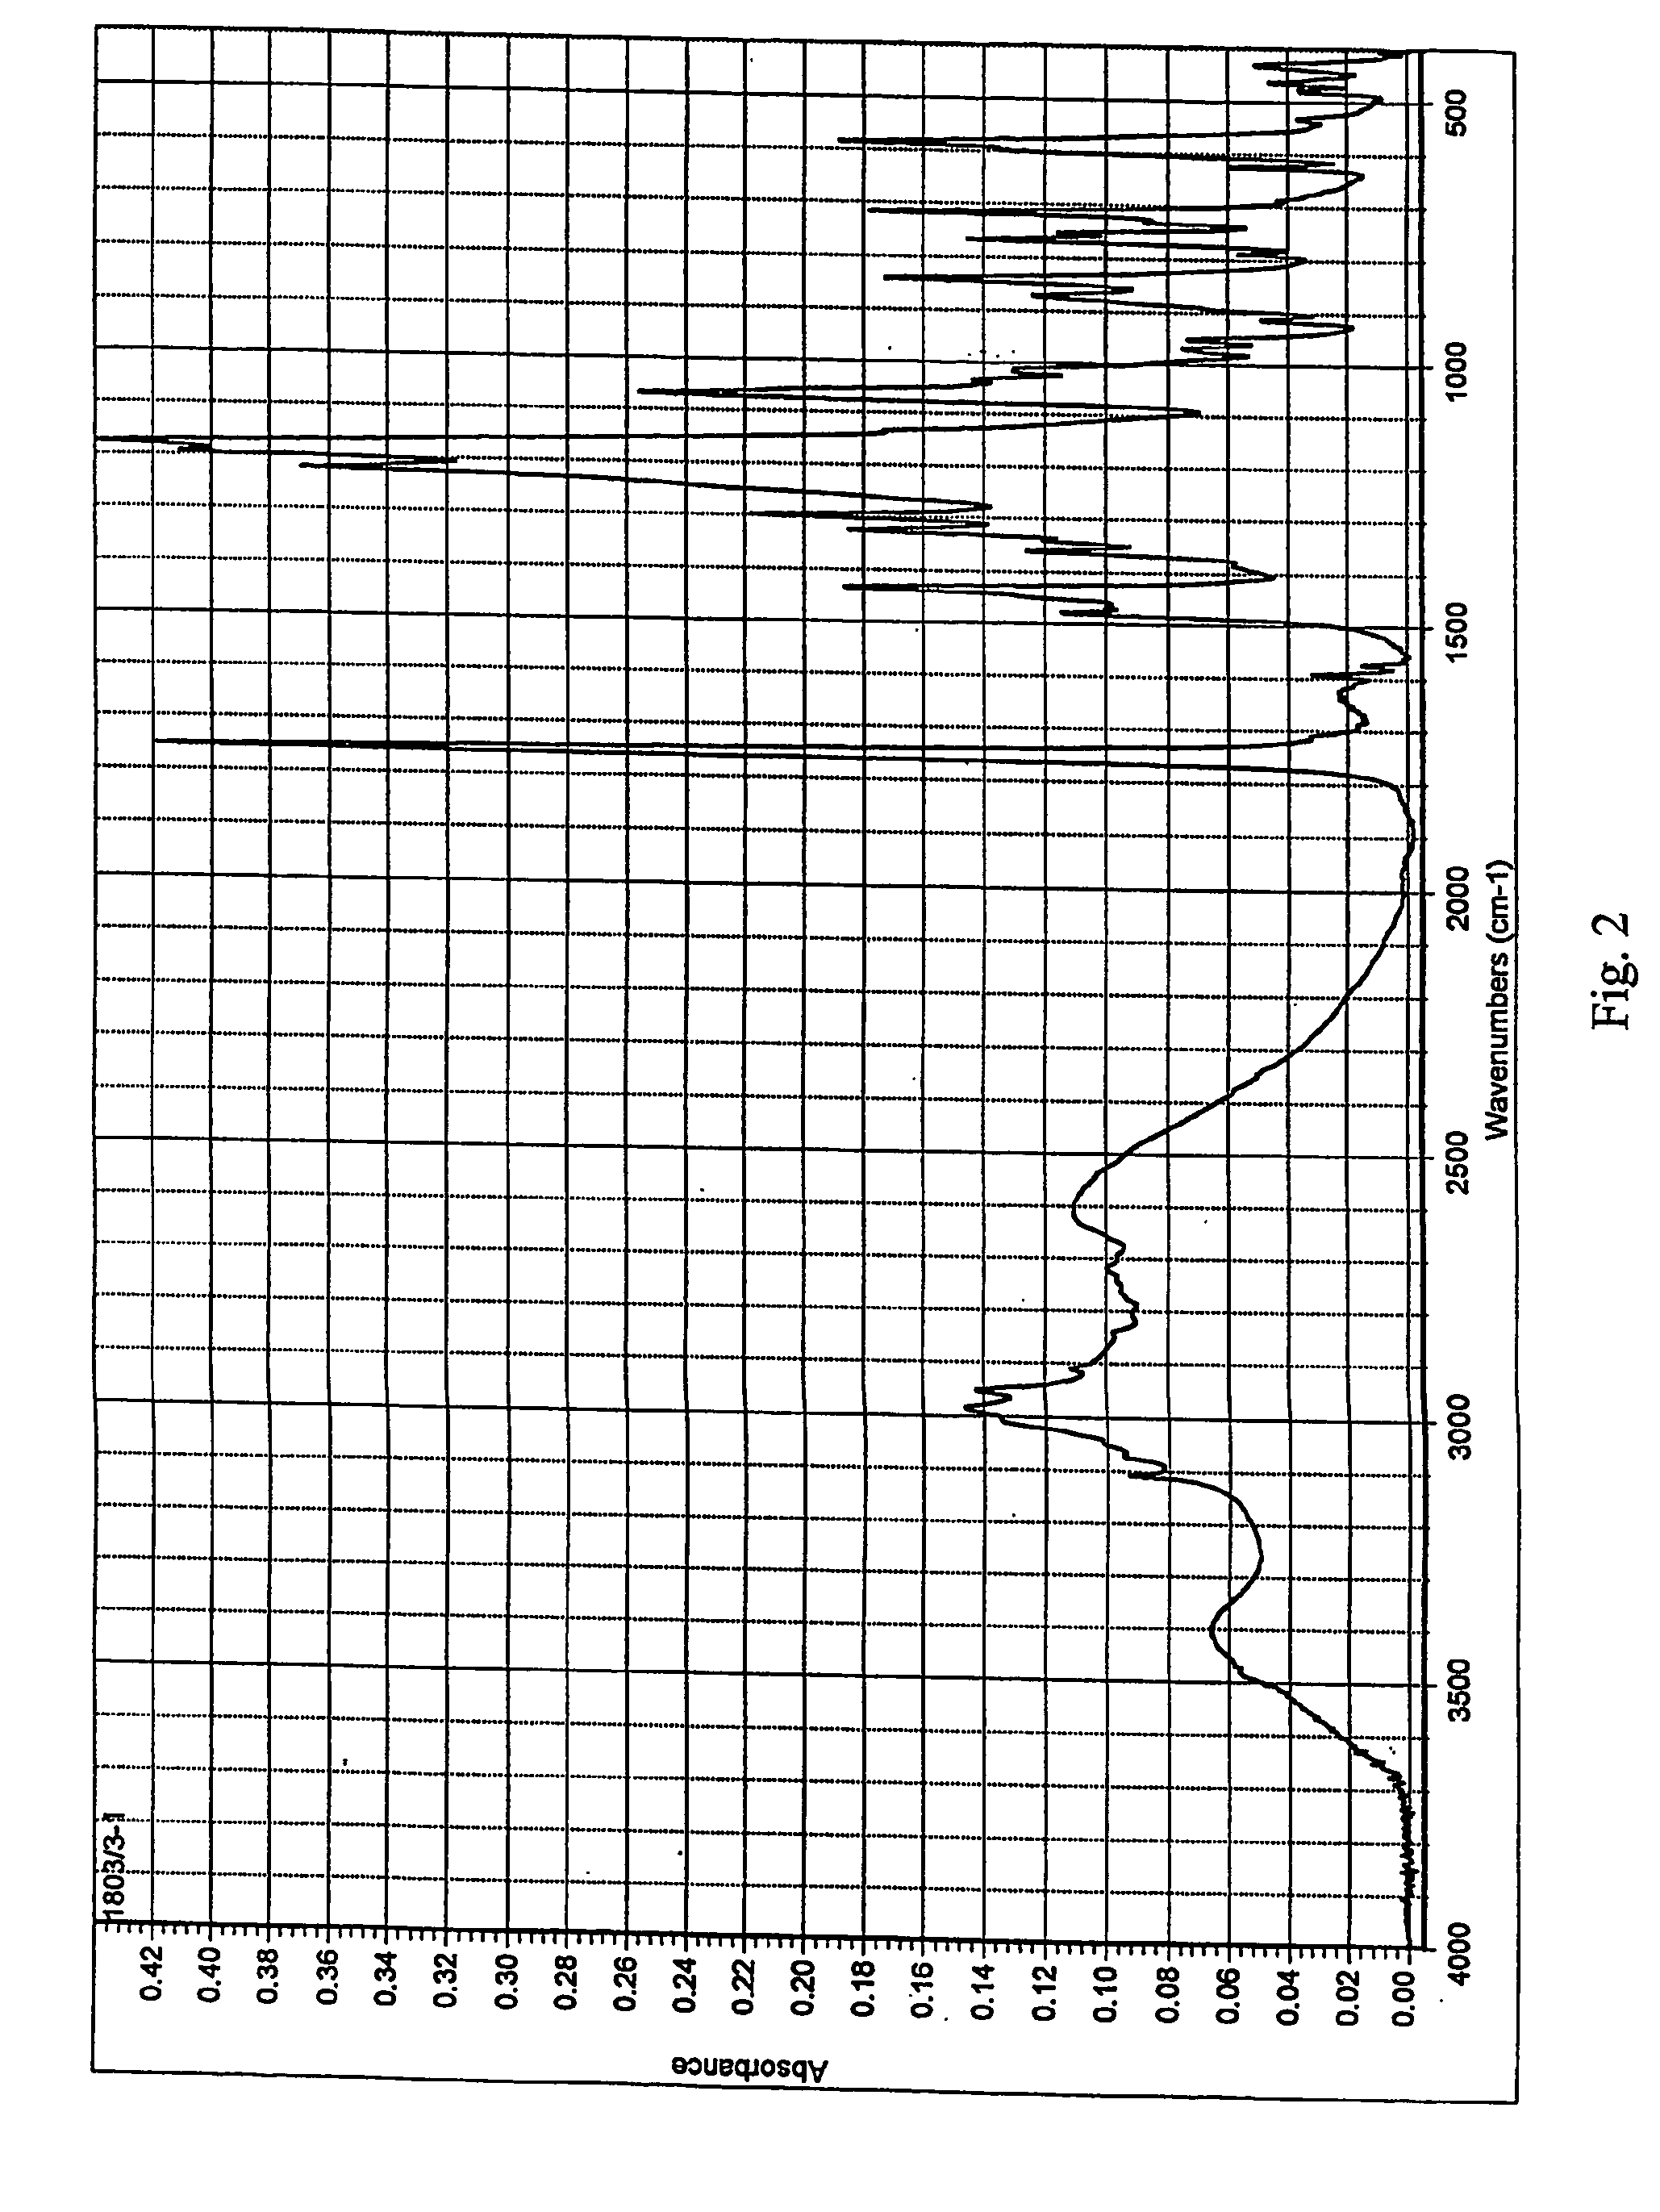 Method for manufacturing crystalline form I of clopidogrel hydrogen sulphate